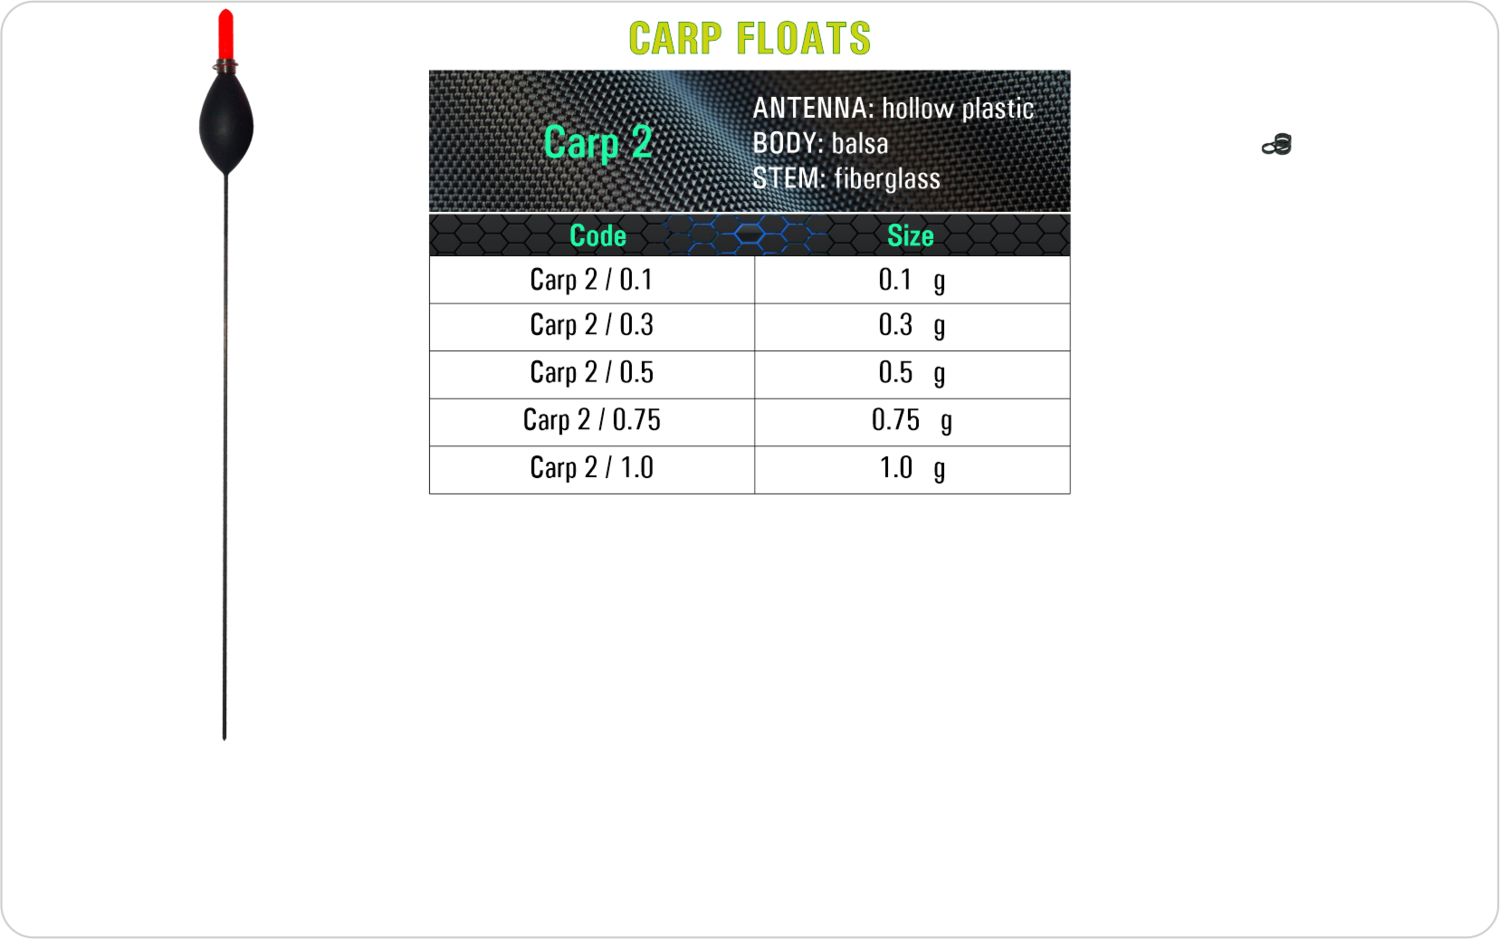 SF Carp 2 Carp float model and table containing an additional information about this float with different codes, sizes, types of the body, the stem and the antenna of the float.